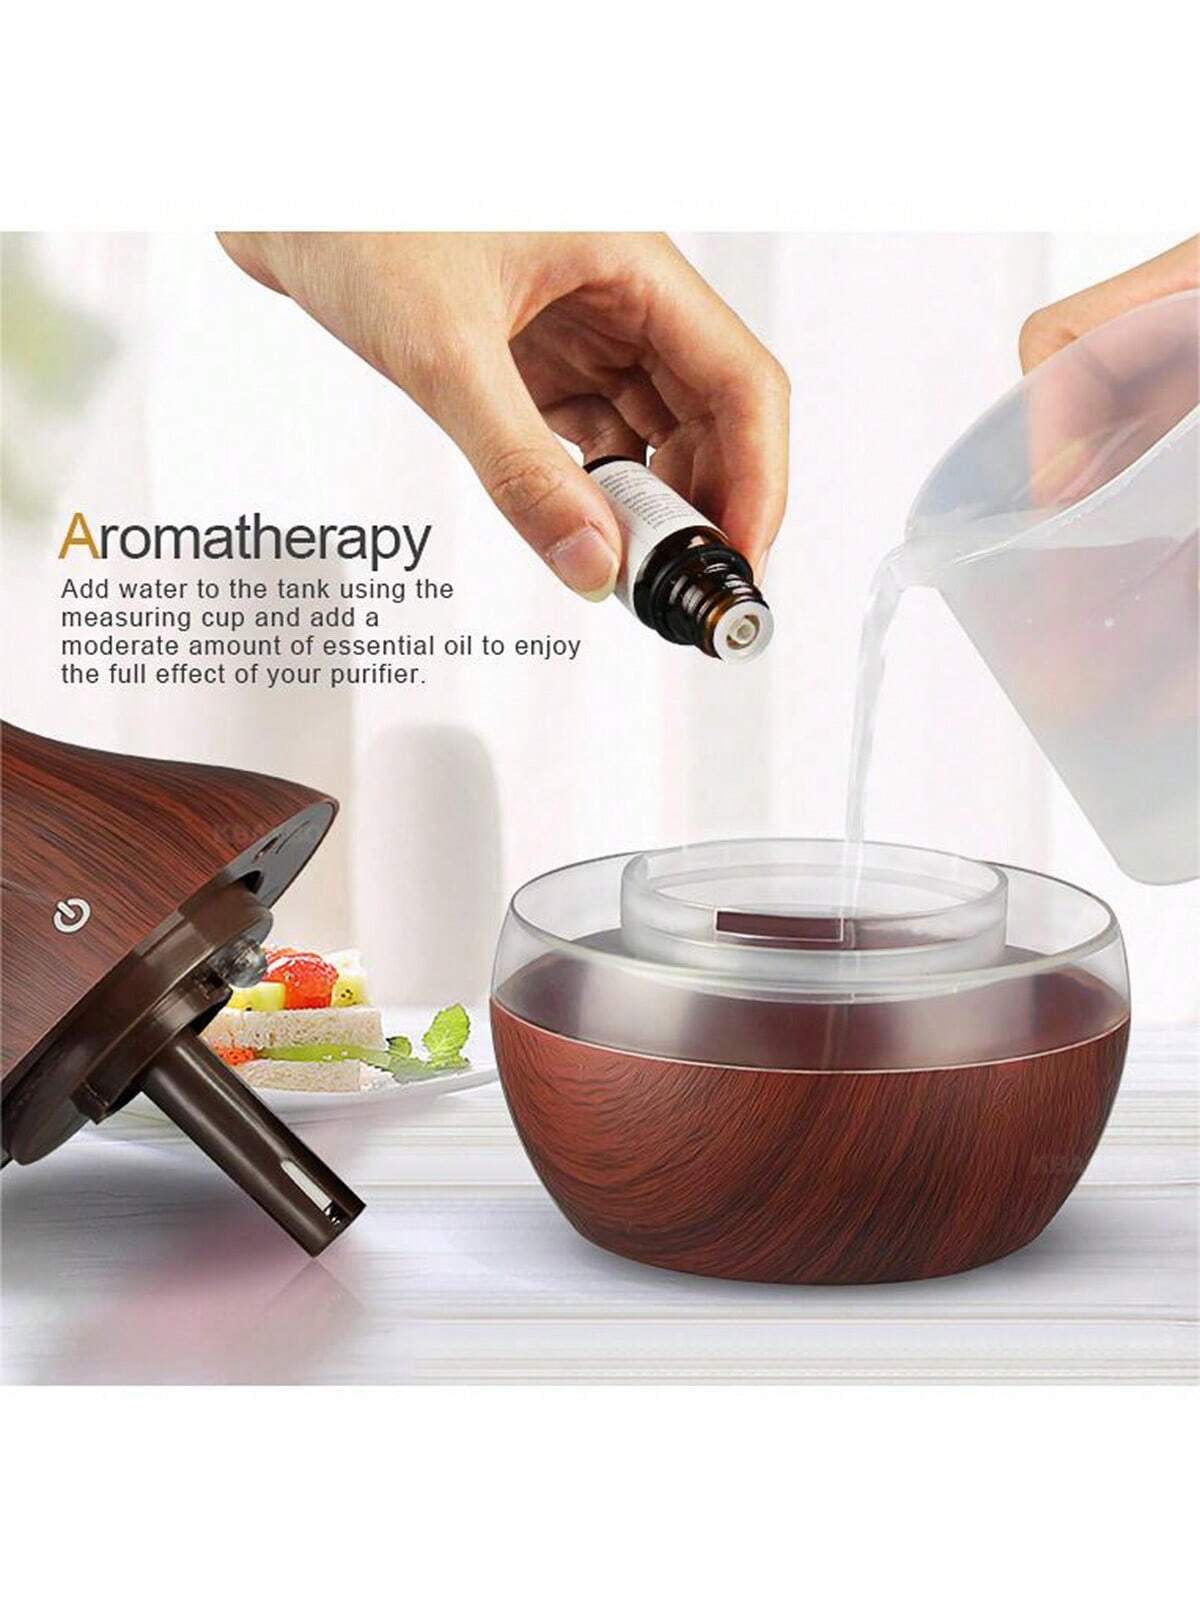 1pc Portable Usb Desktop Wood-grain Color Flowerpot Humidifier, Aromatherapy Diffuser, Water Replenishing Device, Air Purifier Suitable For Home, Bedroom, Outdoor, Travel-dark wood color-6